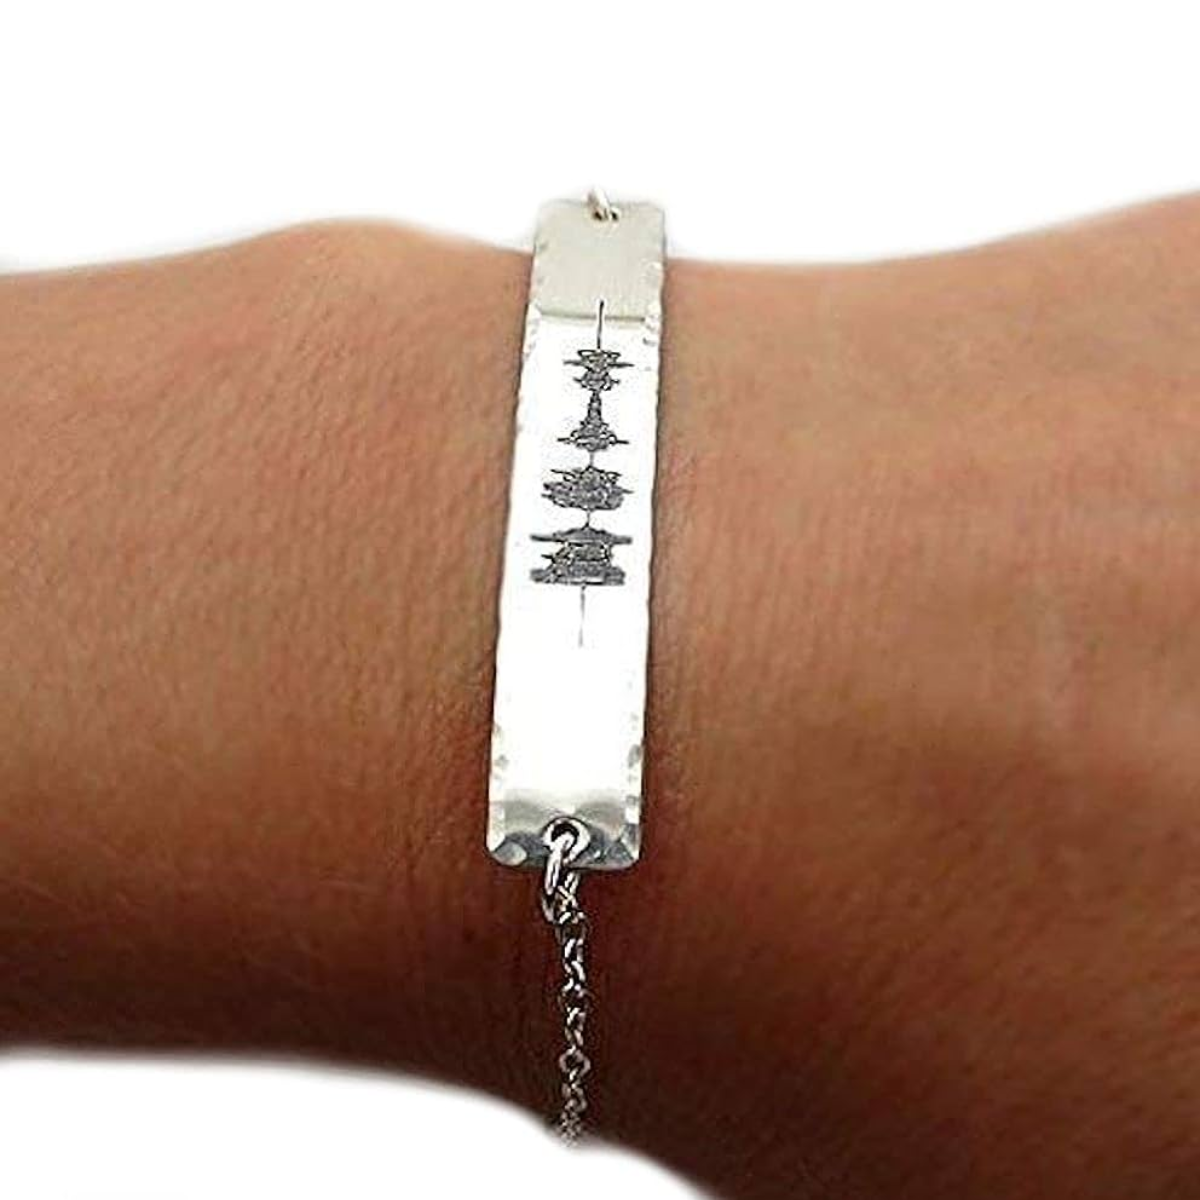 26. Capture Your Love with a Customized Sound Wave Bracelet